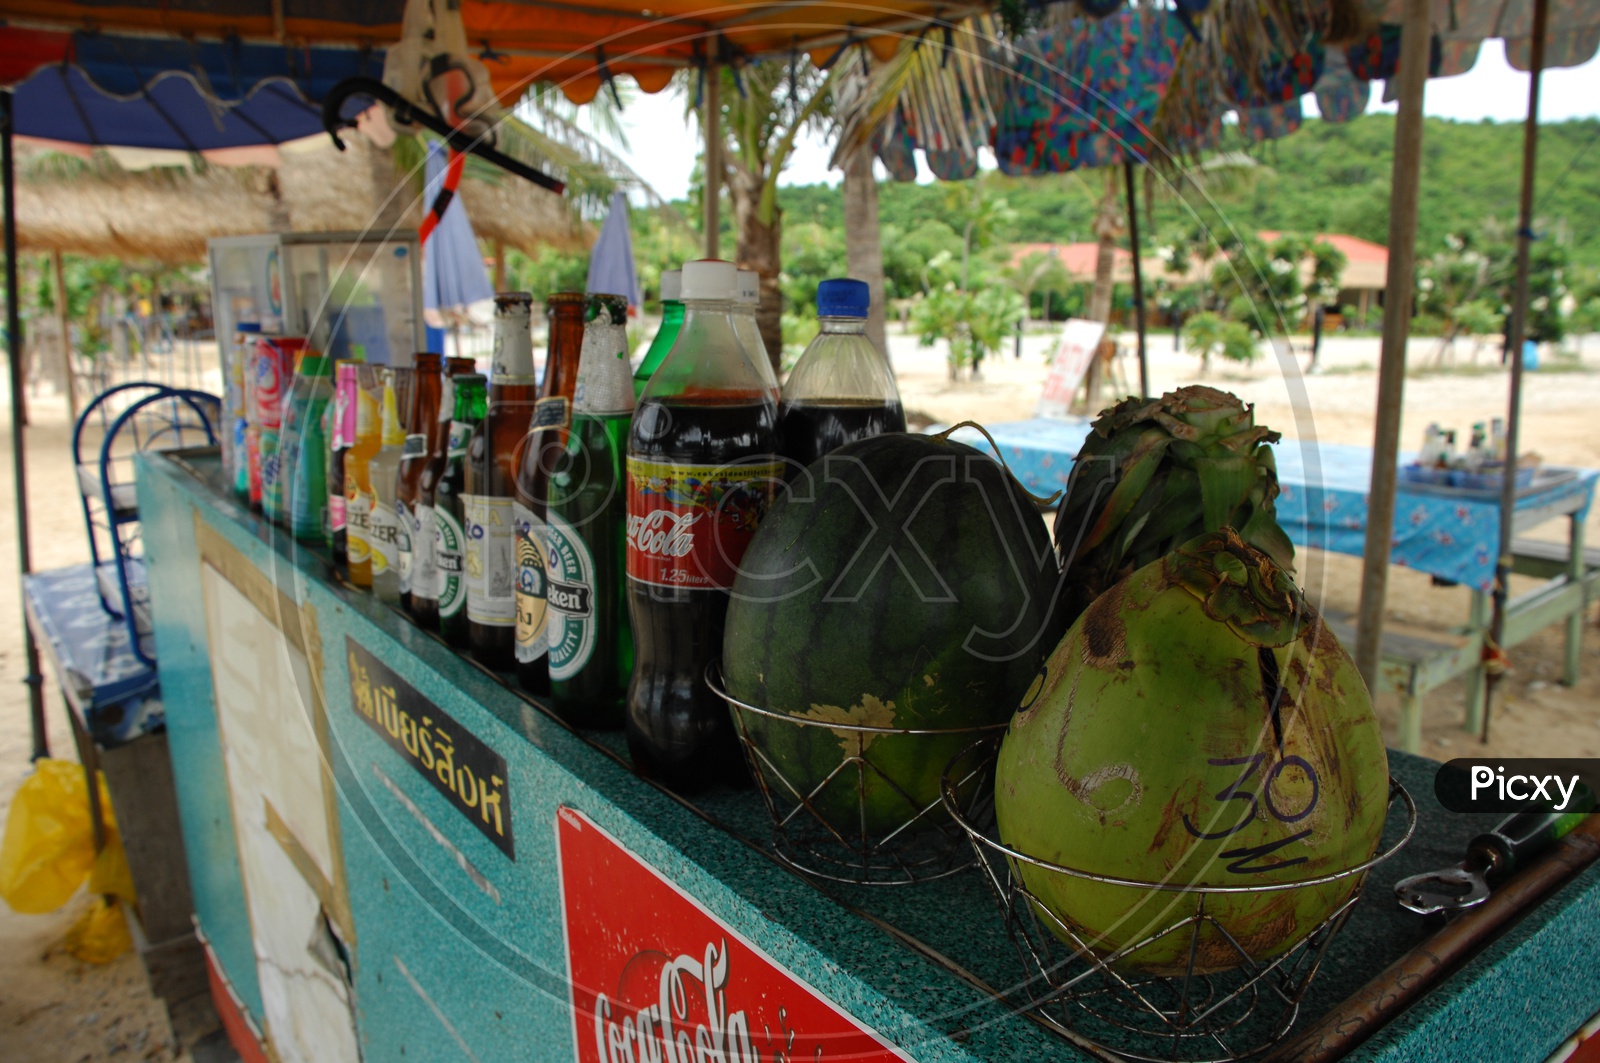 Beverages stall